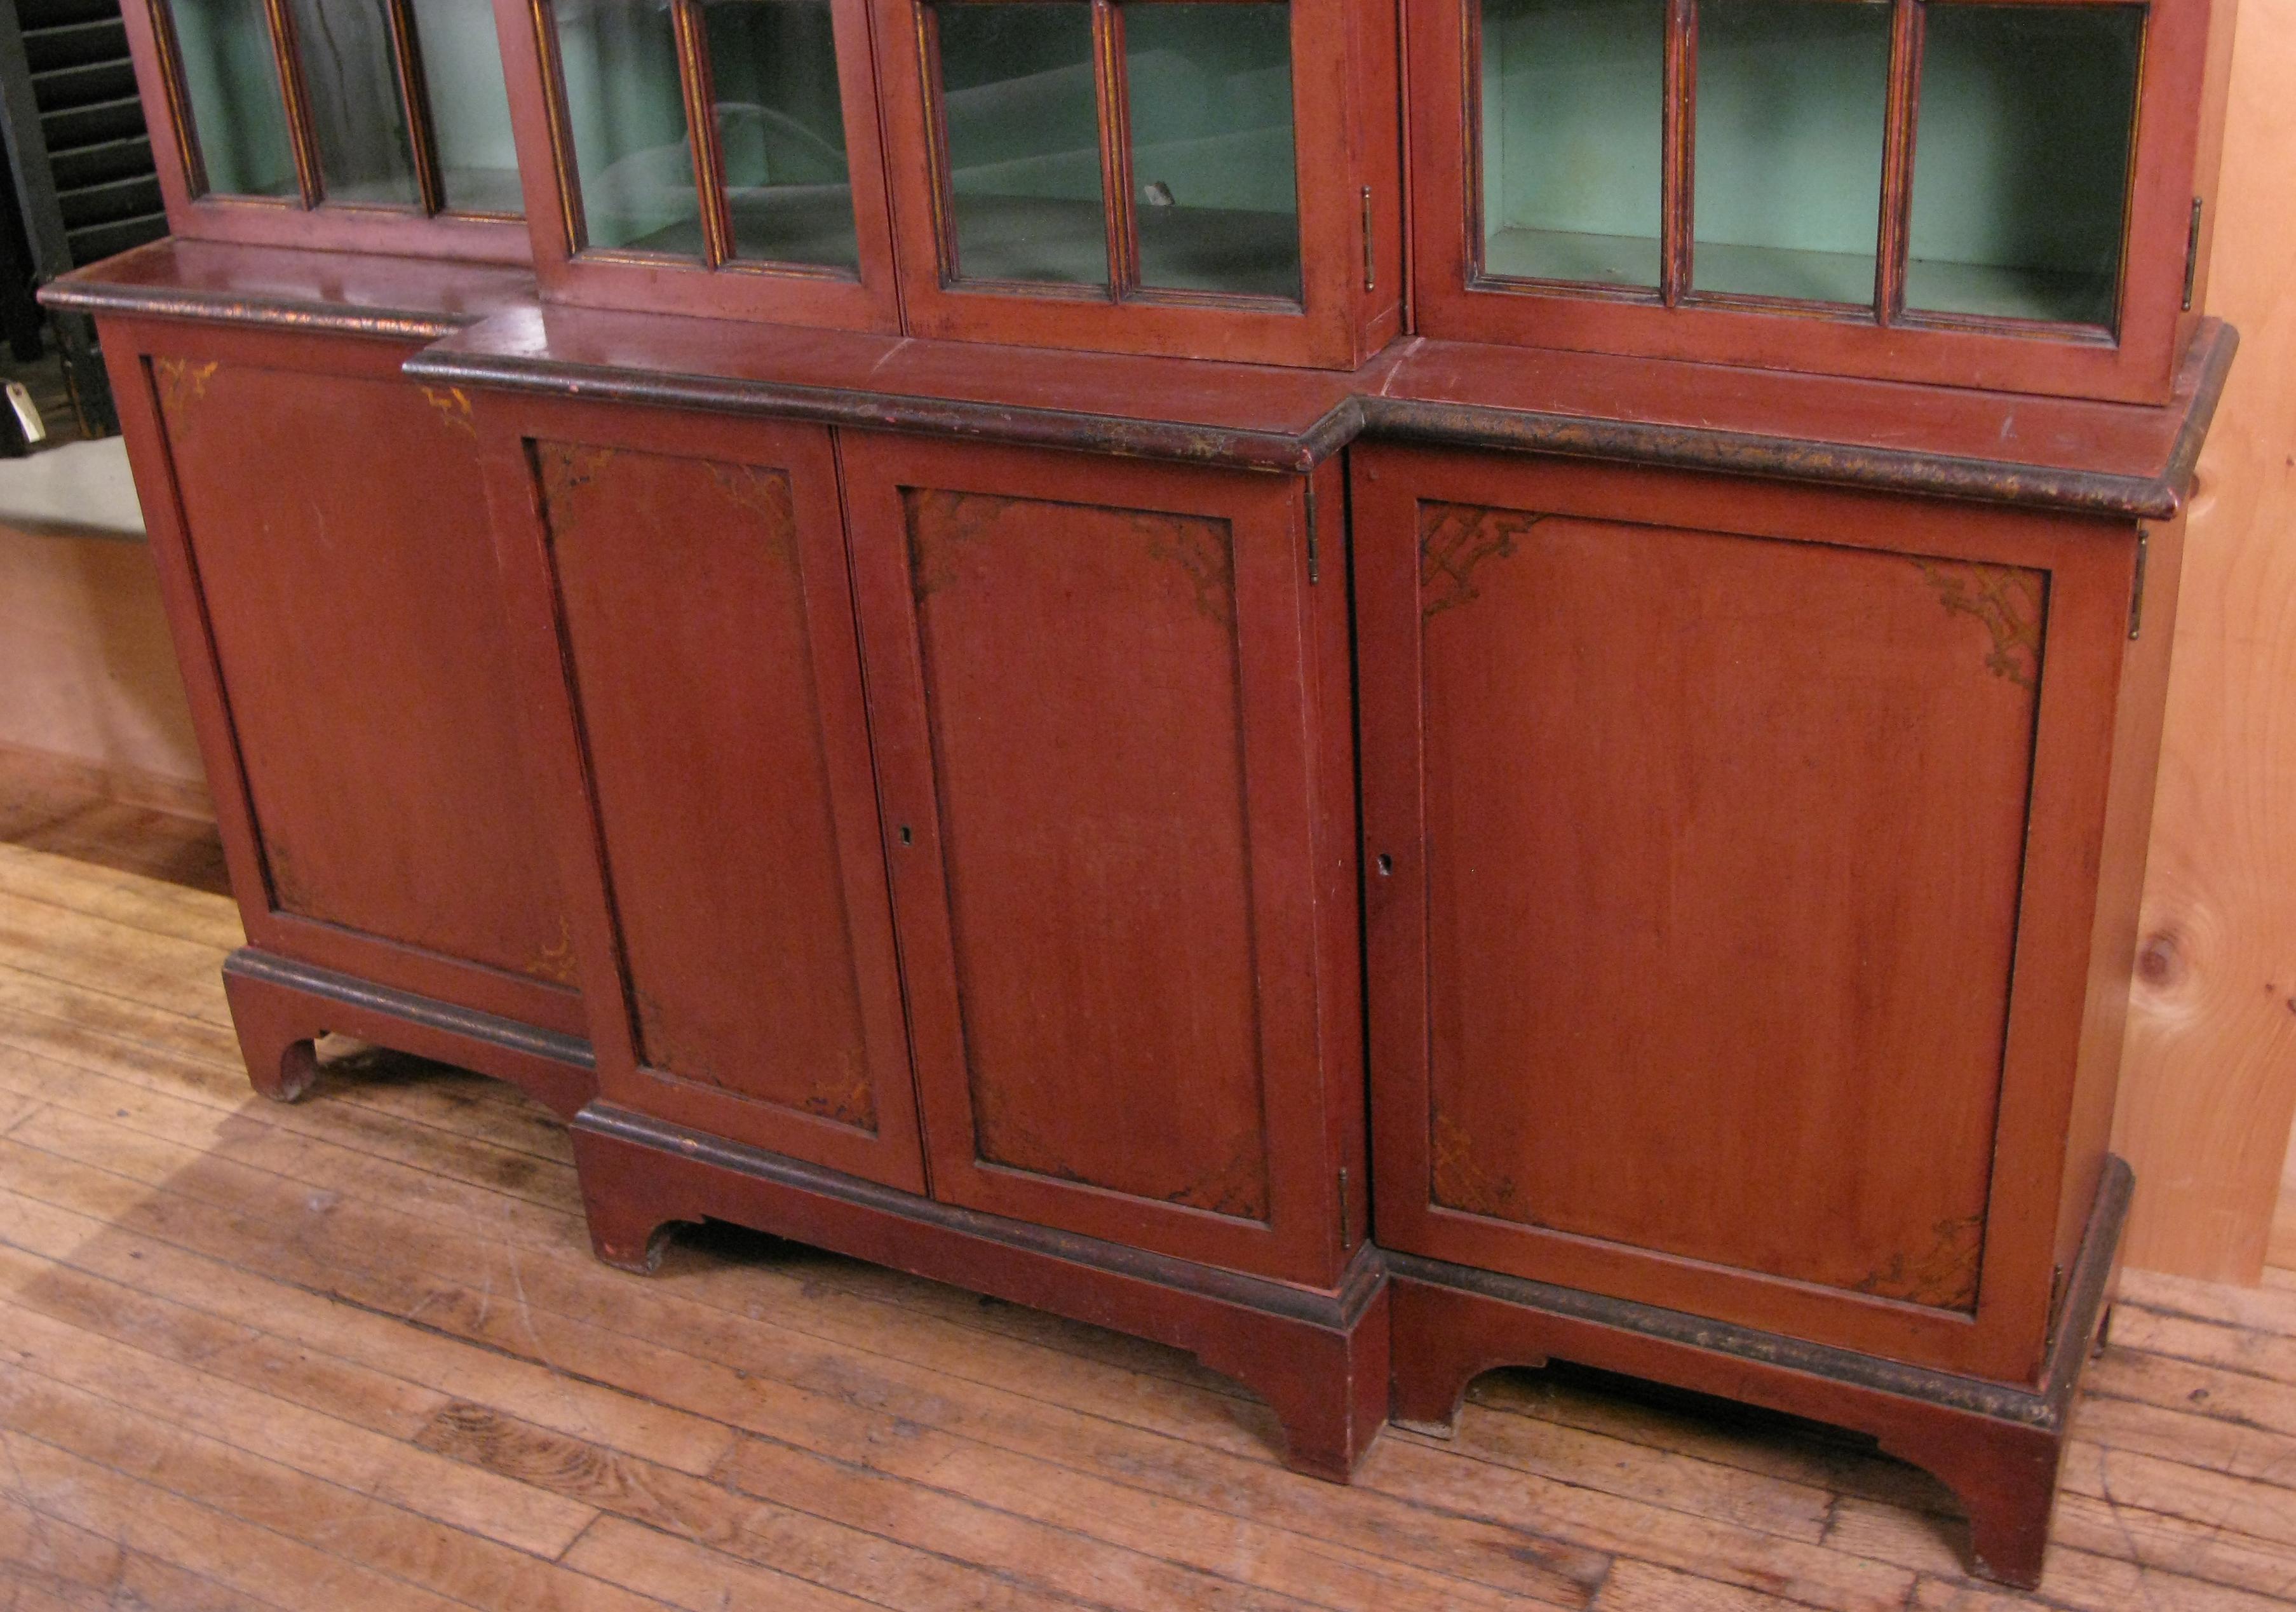 A very beautiful antique 1920s bookcase in chinoiserie style. Finished in Pompeii red, with interiors in Paris green. The lower case has four doors concealing shelves, and the upper portion has four divided pane glass doors also concealing shelves.